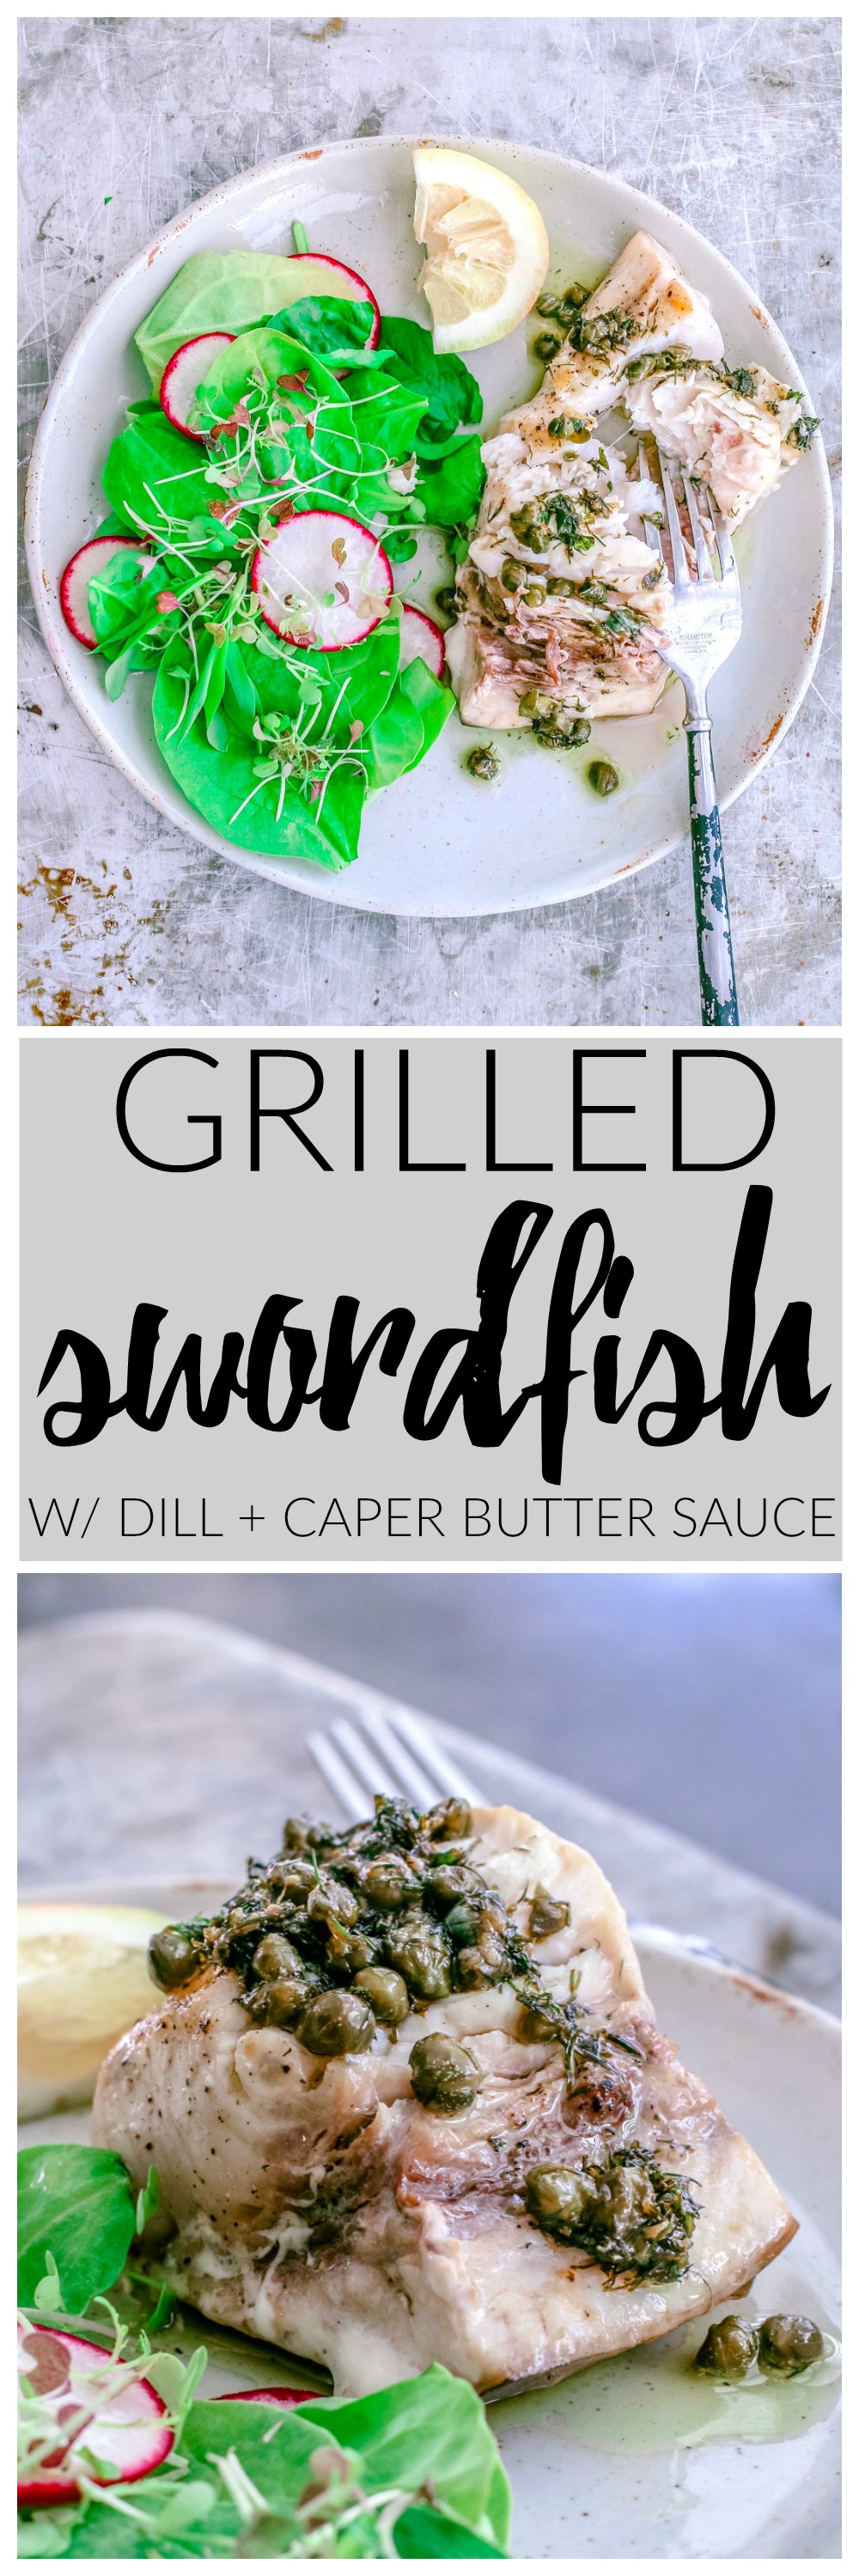 Grilled Swordfish With Dill and Caper Butter Sauce | Killing Thyme